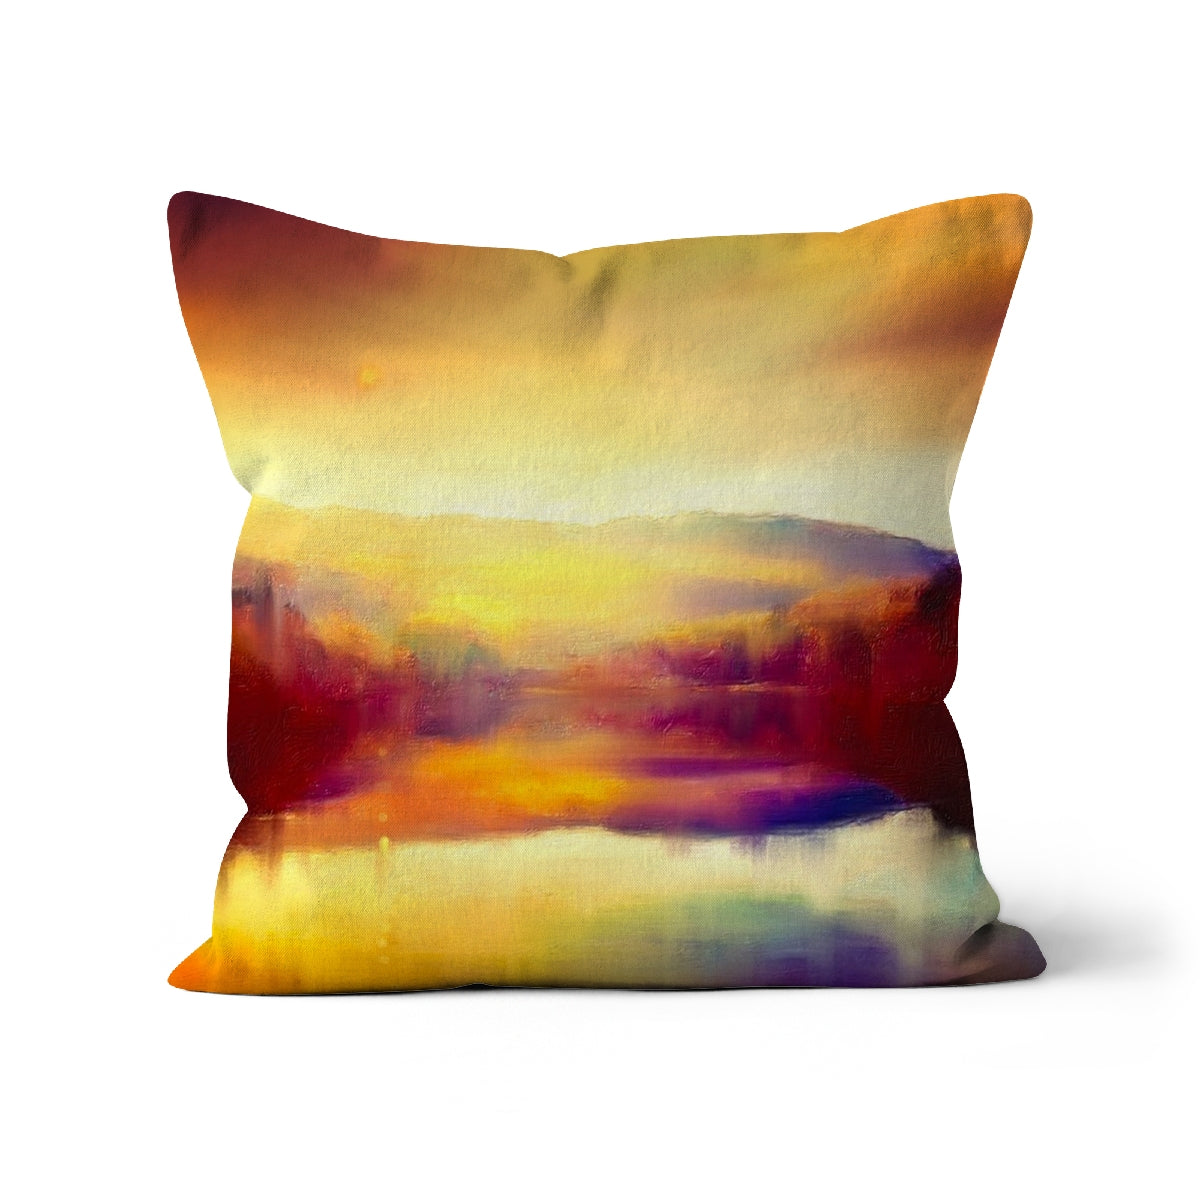 Loch Faskally Dusk Art Gifts Cushion-Cushions-Scottish Lochs & Mountains Art Gallery-Canvas-12"x12"-Paintings, Prints, Homeware, Art Gifts From Scotland By Scottish Artist Kevin Hunter